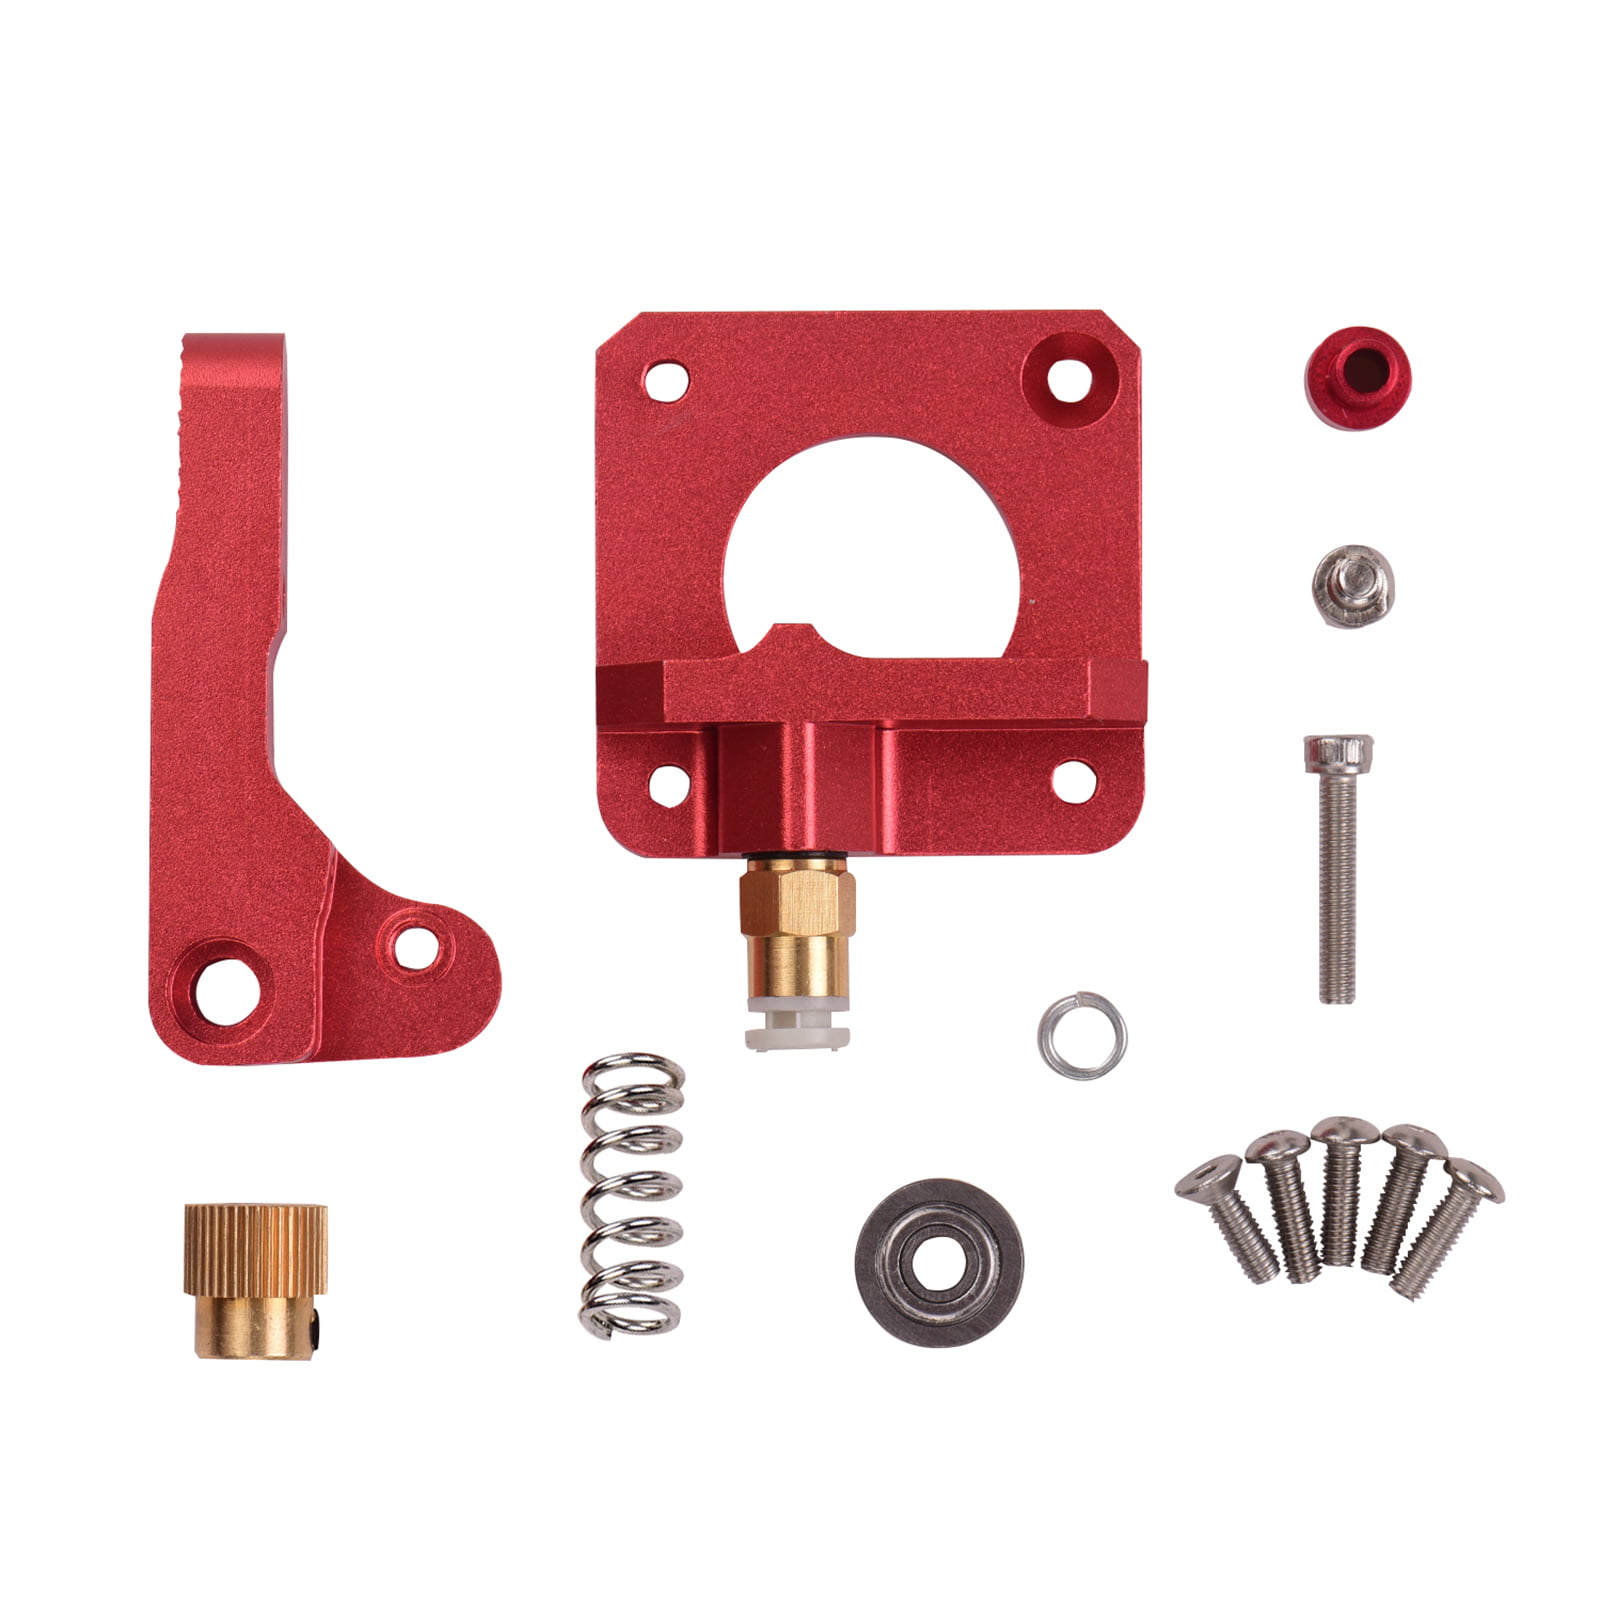 Remote CR-10S PRO double pulley extruder feeder+40mm Motor for 1.75mm filament. 